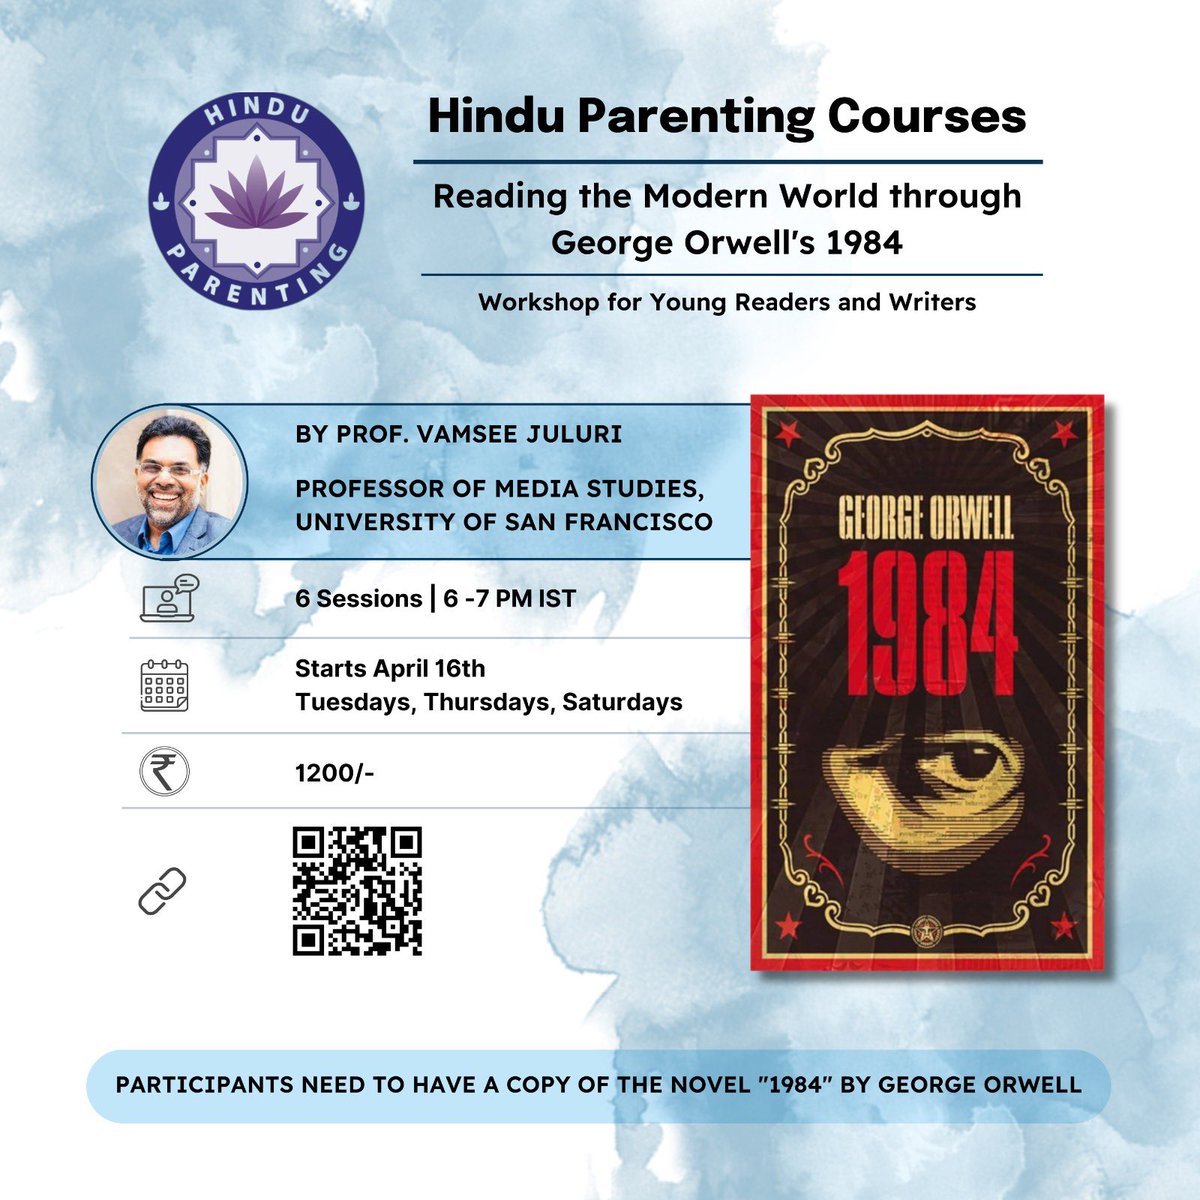 Parents, this is precisely the sort of thing to watch for. Unless we develop clarity of thought, viveka, it’s bound to happen. Teaching shlokas is not enough. Attend our workshops, read our guide on handling activism. This is more insidious than it looks - the kurti that she…